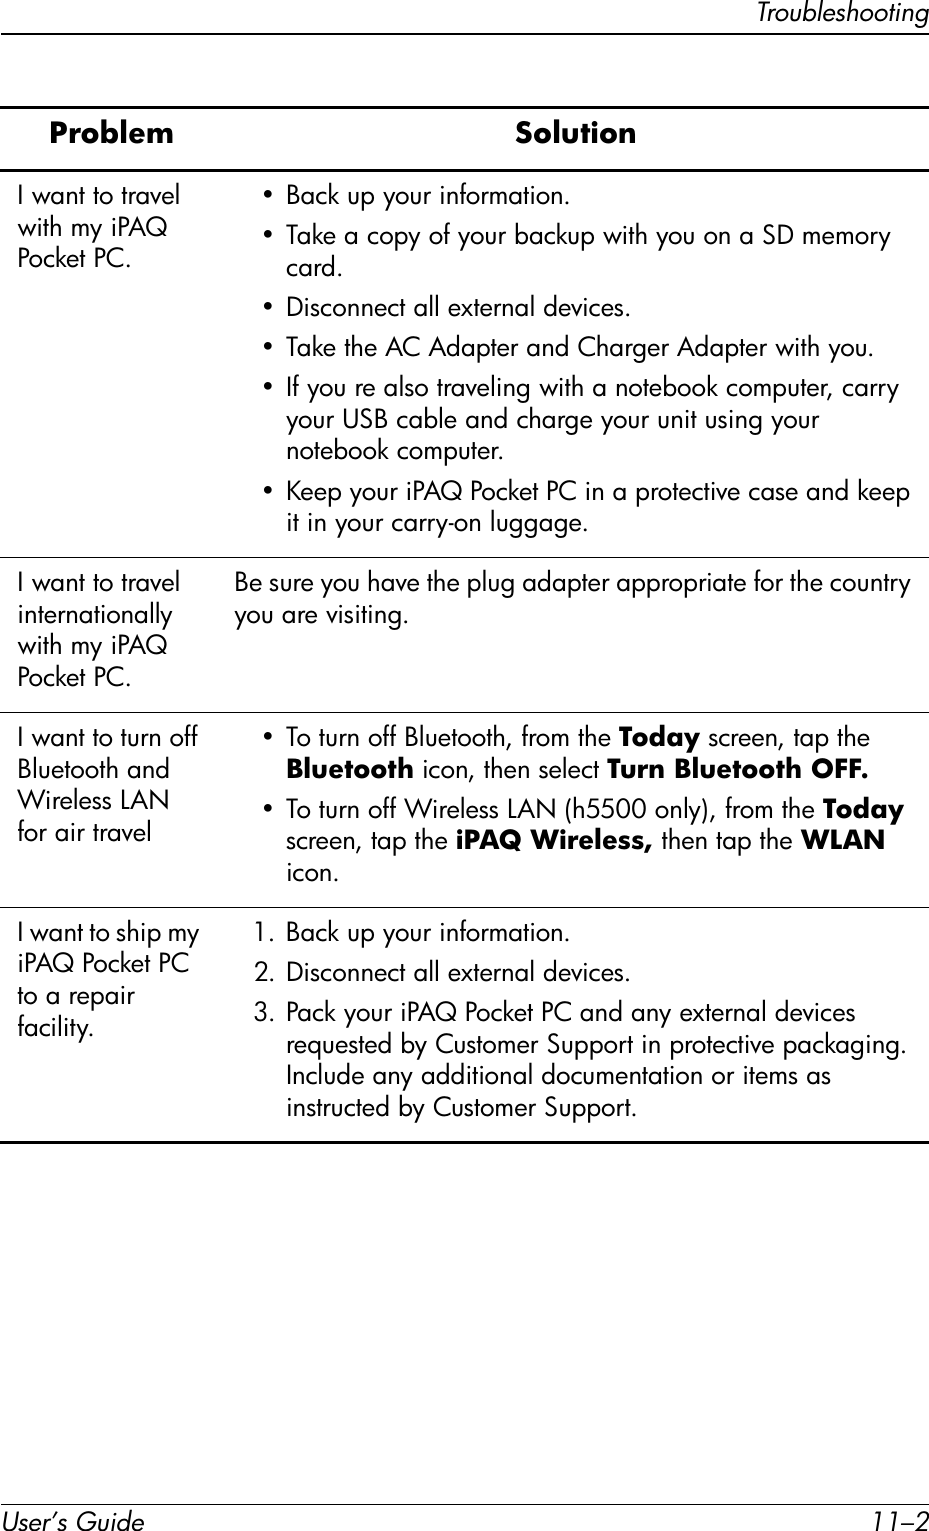 User’s Guide 11–2TroubleshootingI want to travel with my iPAQ Pocket PC.• Back up your information.• Take a copy of your backup with you on a SD memory card.• Disconnect all external devices.• Take the AC Adapter and Charger Adapter with you.• If you re also traveling with a notebook computer, carry your USB cable and charge your unit using your notebook computer.• Keep your iPAQ Pocket PC in a protective case and keep it in your carry-on luggage.I want to travel internationally with my iPAQ Pocket PC.Be sure you have the plug adapter appropriate for the country you are visiting.I want to turn off Bluetooth and Wireless LAN for air travel• To turn off Bluetooth, from the Today screen, tap the Bluetooth icon, then select Turn Bluetooth OFF.• To turn off Wireless LAN (h5500 only), from the Today screen, tap the iPAQ Wireless, then tap the WLAN icon.I want to ship my iPAQ Pocket PC to a repair facility.1. Back up your information.2. Disconnect all external devices.3. Pack your iPAQ Pocket PC and any external devices requested by Customer Support in protective packaging. Include any additional documentation or items as instructed by Customer Support.Problem  Solution